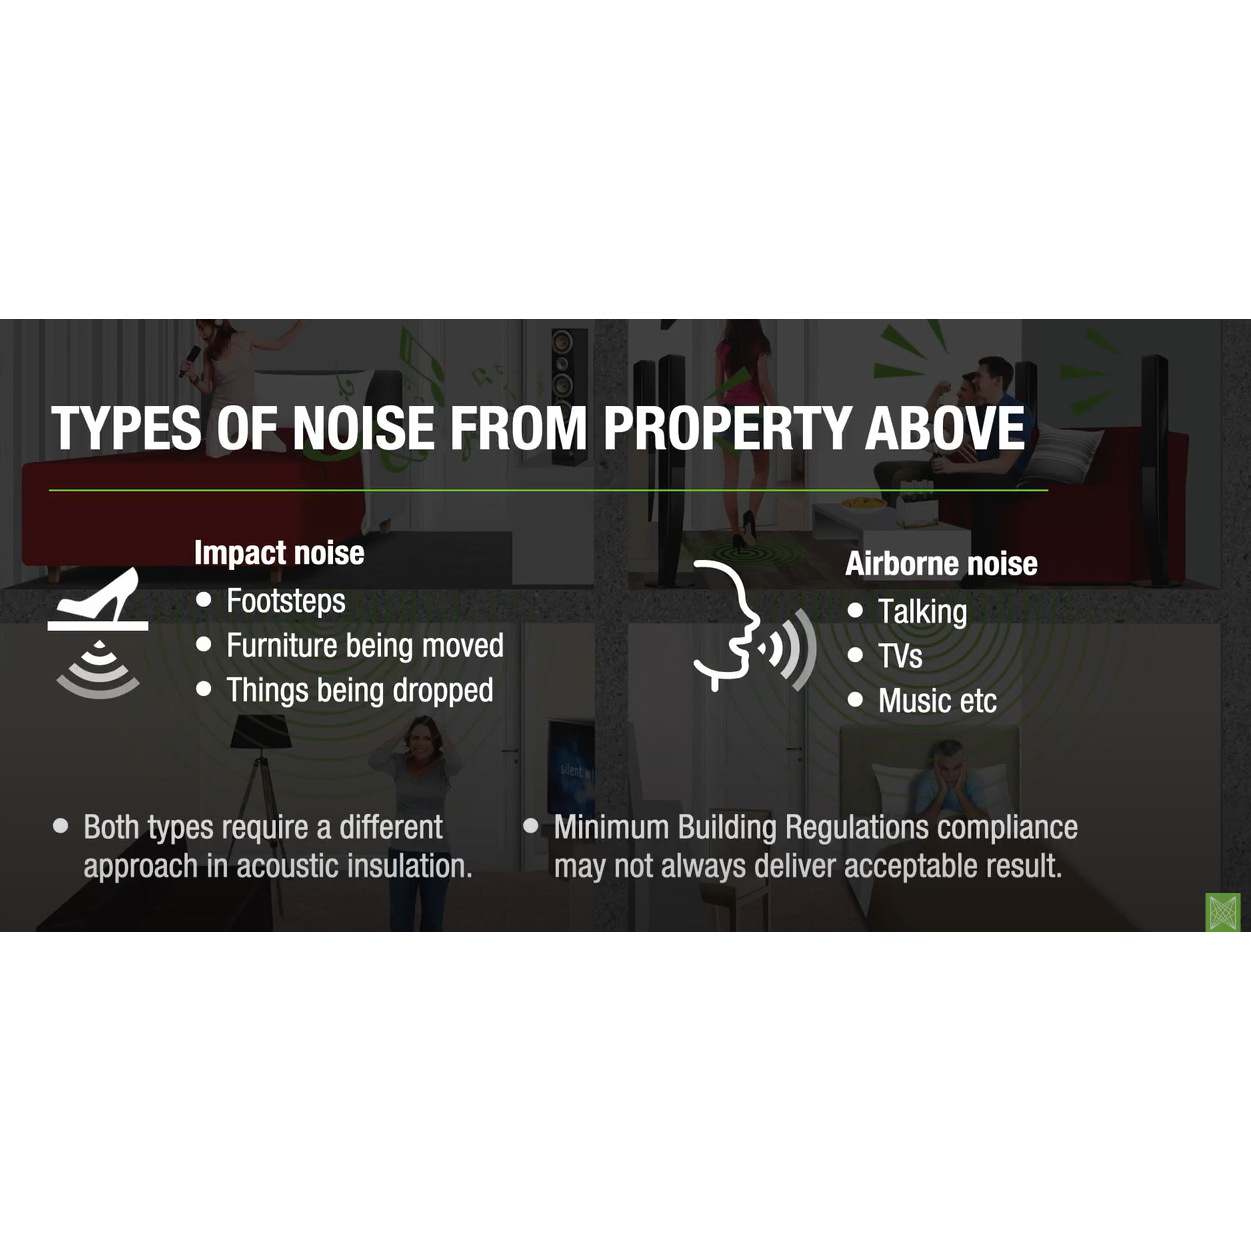 How to start solving the problem of nuisance noise from properties or rooms above